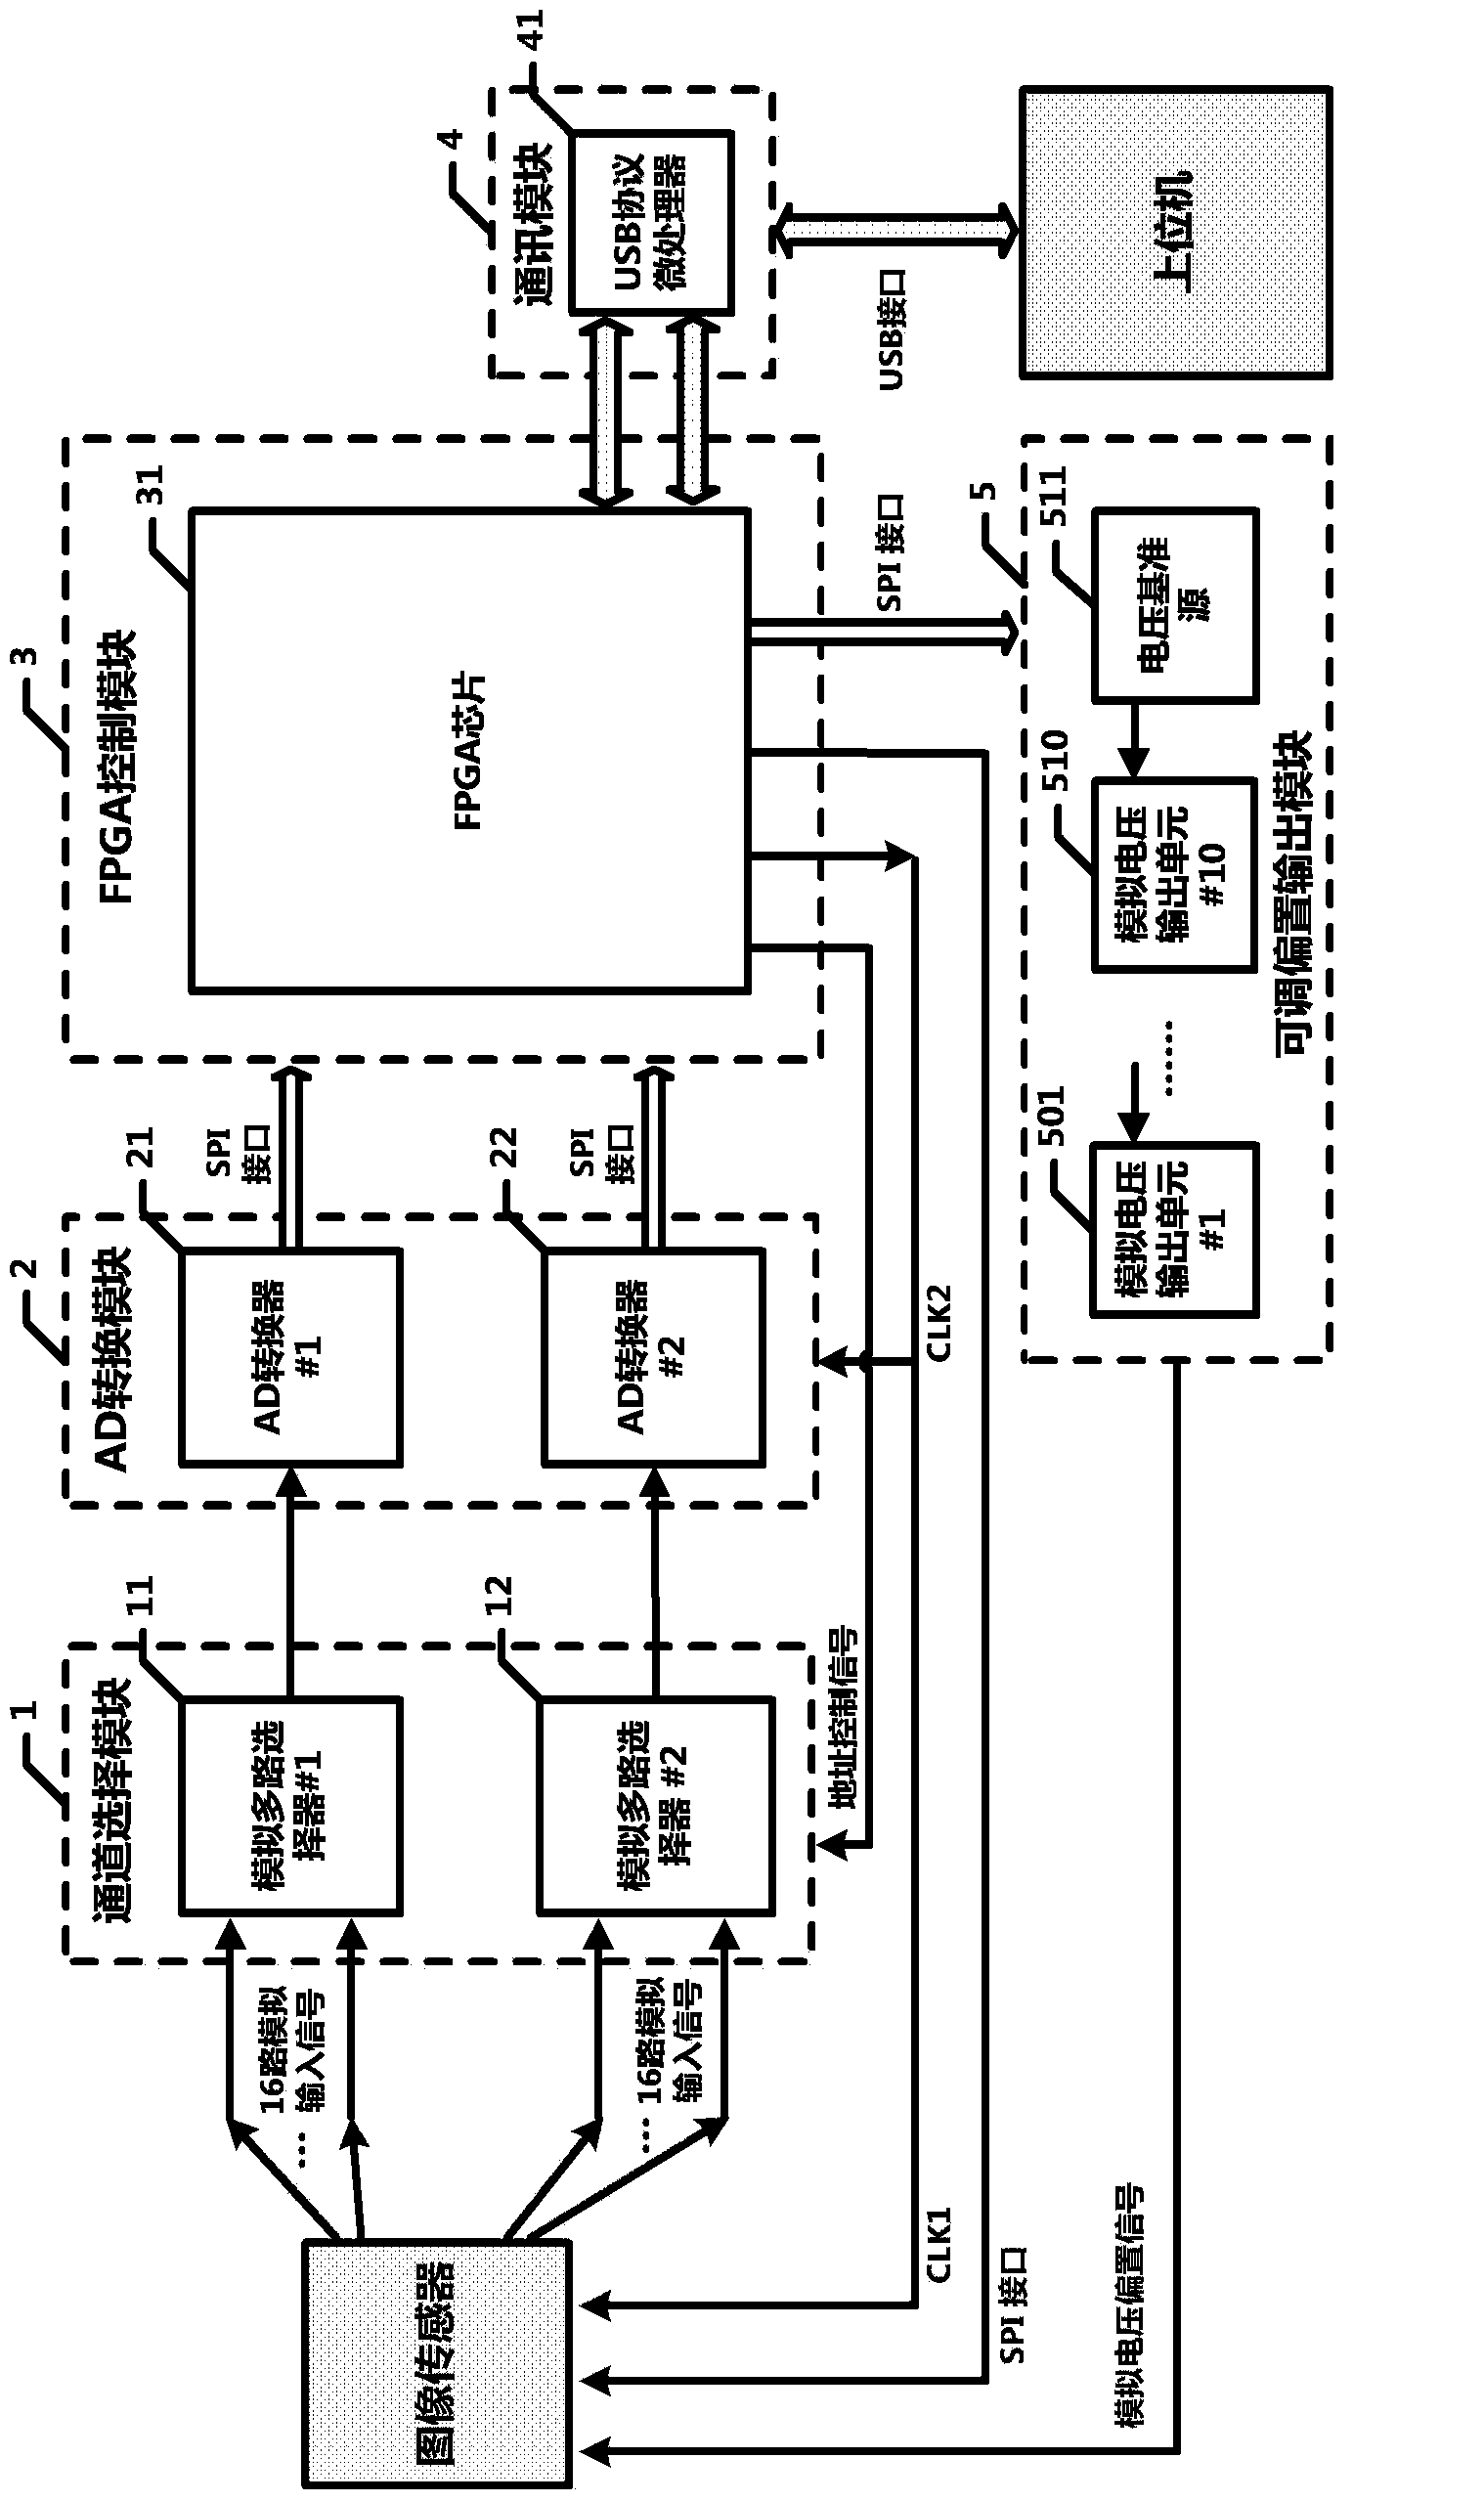 Low-cost image data collection transmission system free of external storage and based on field programmable gate array (FPGA)